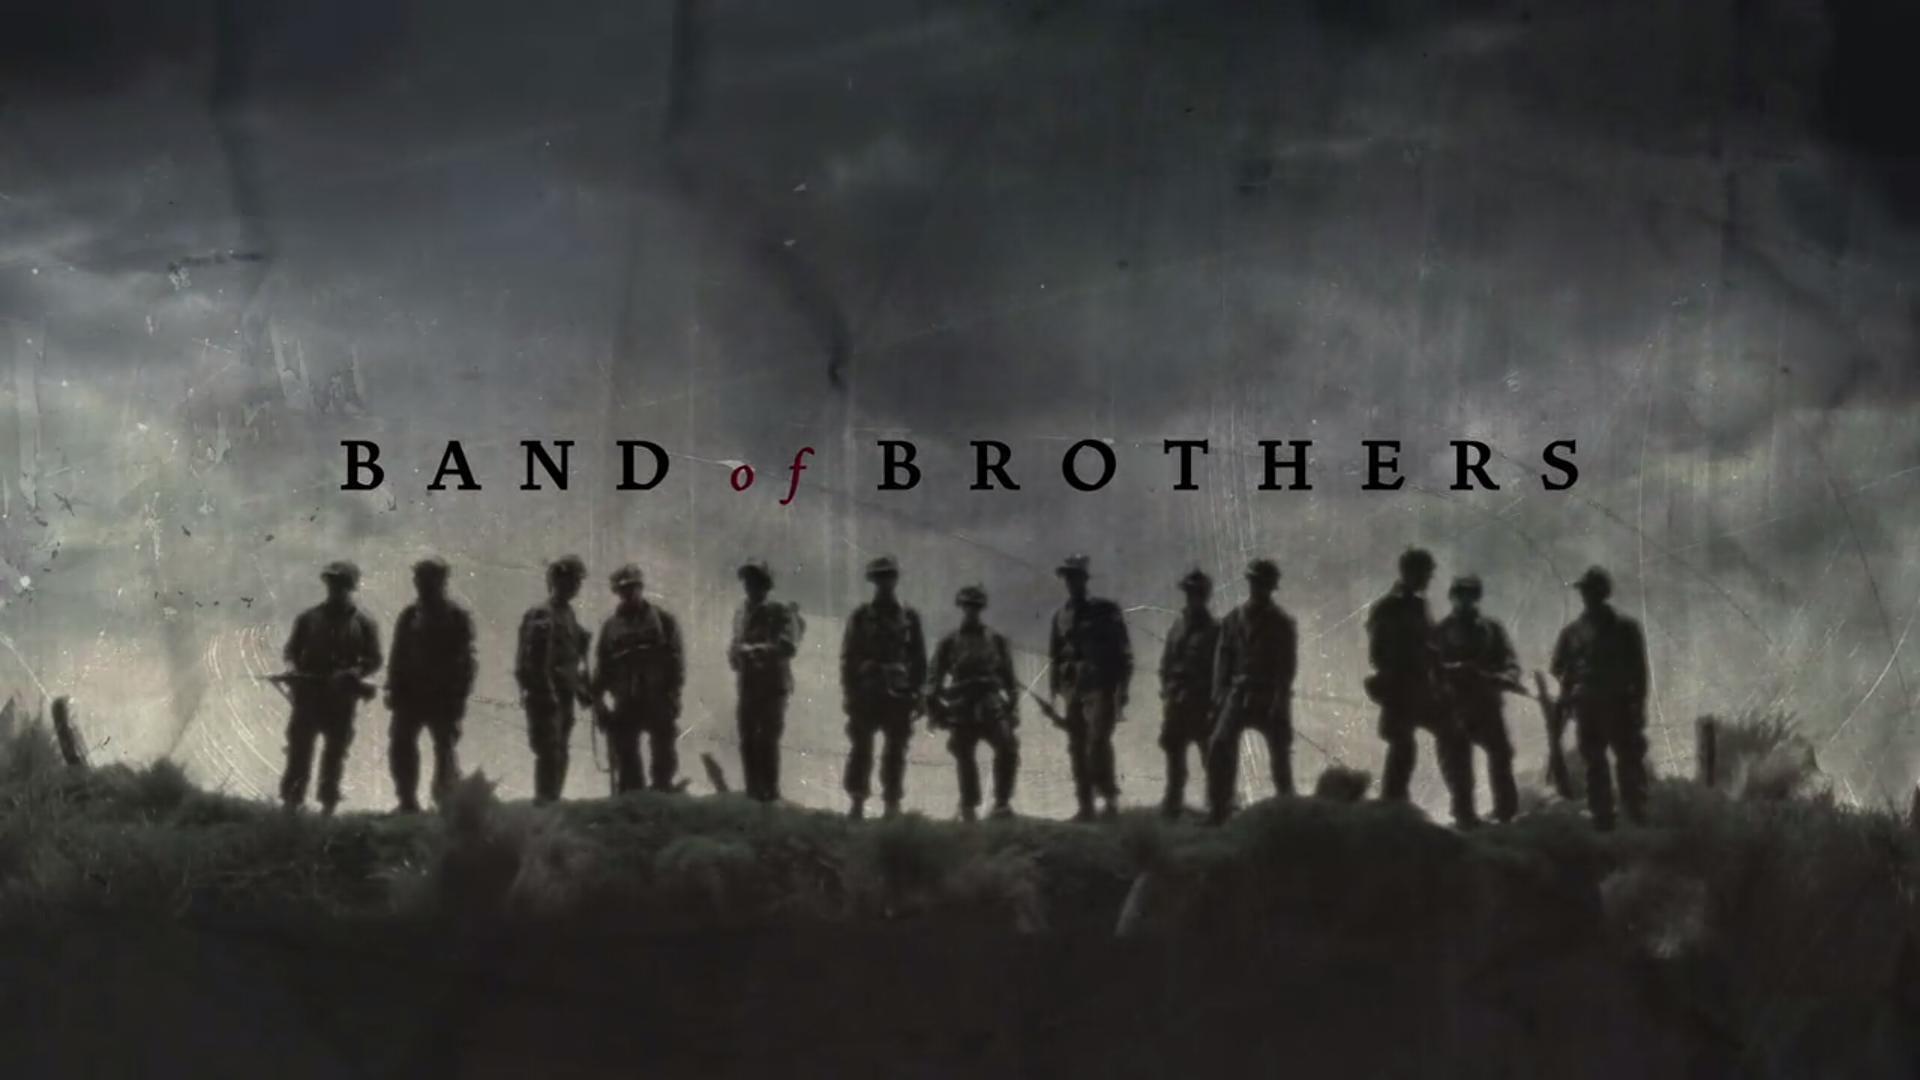 Band Of Brothers Wallpaper 32839 1920x1080 px